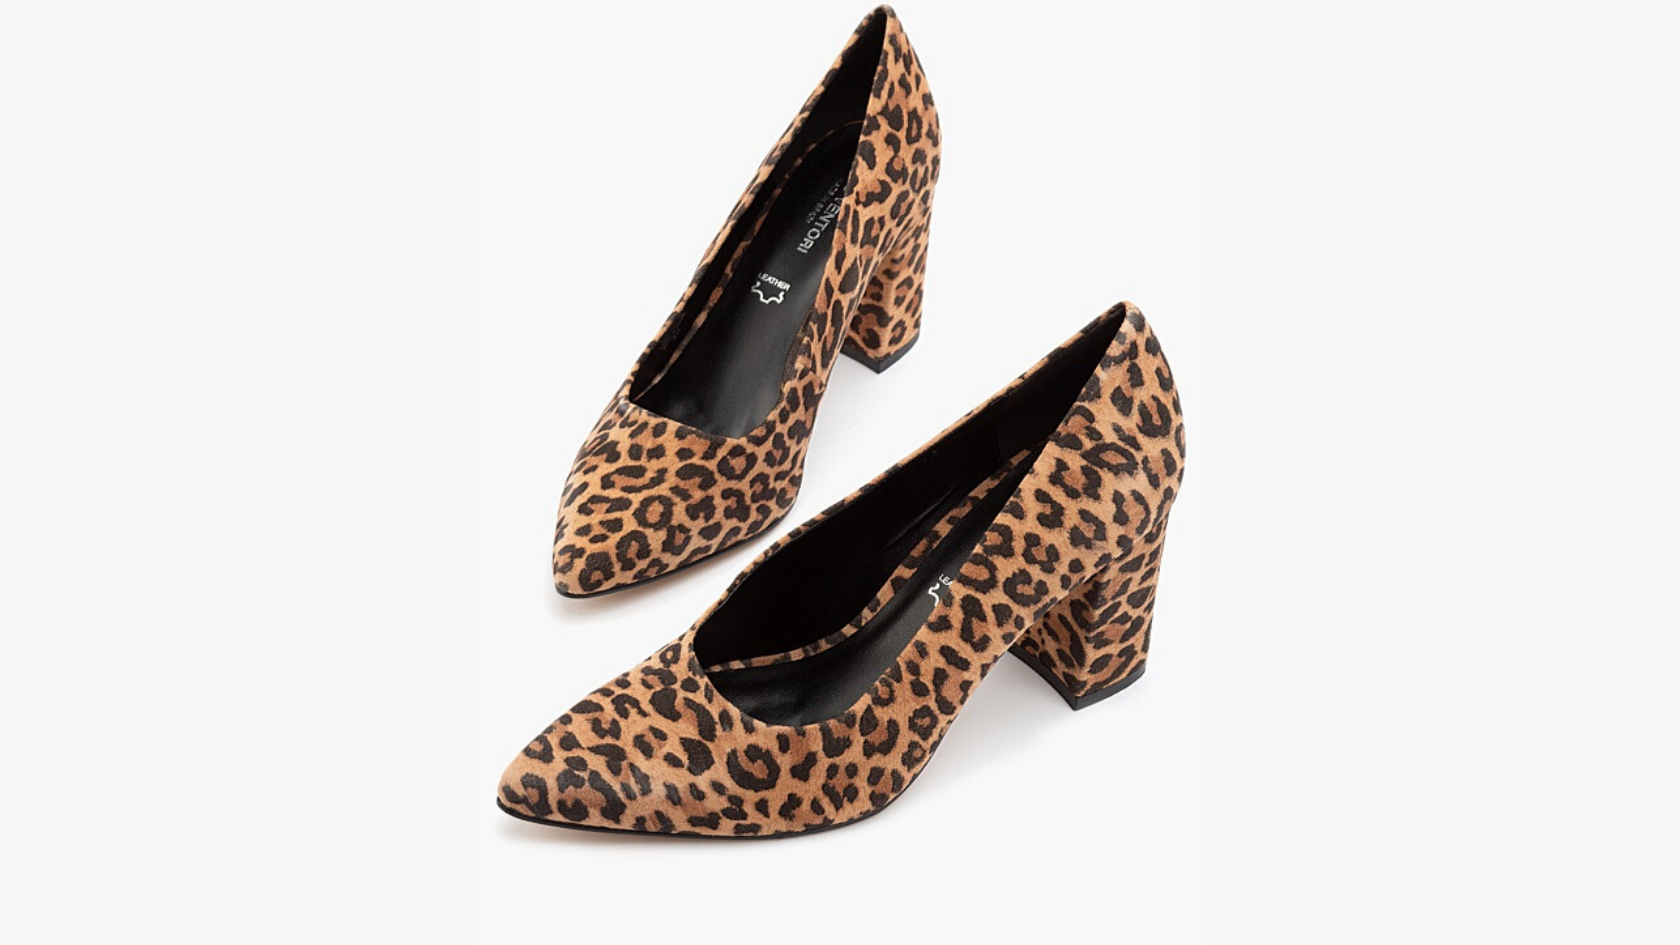 A pair of Gino Ventori leopard print pointed block heels against a neutral background. 